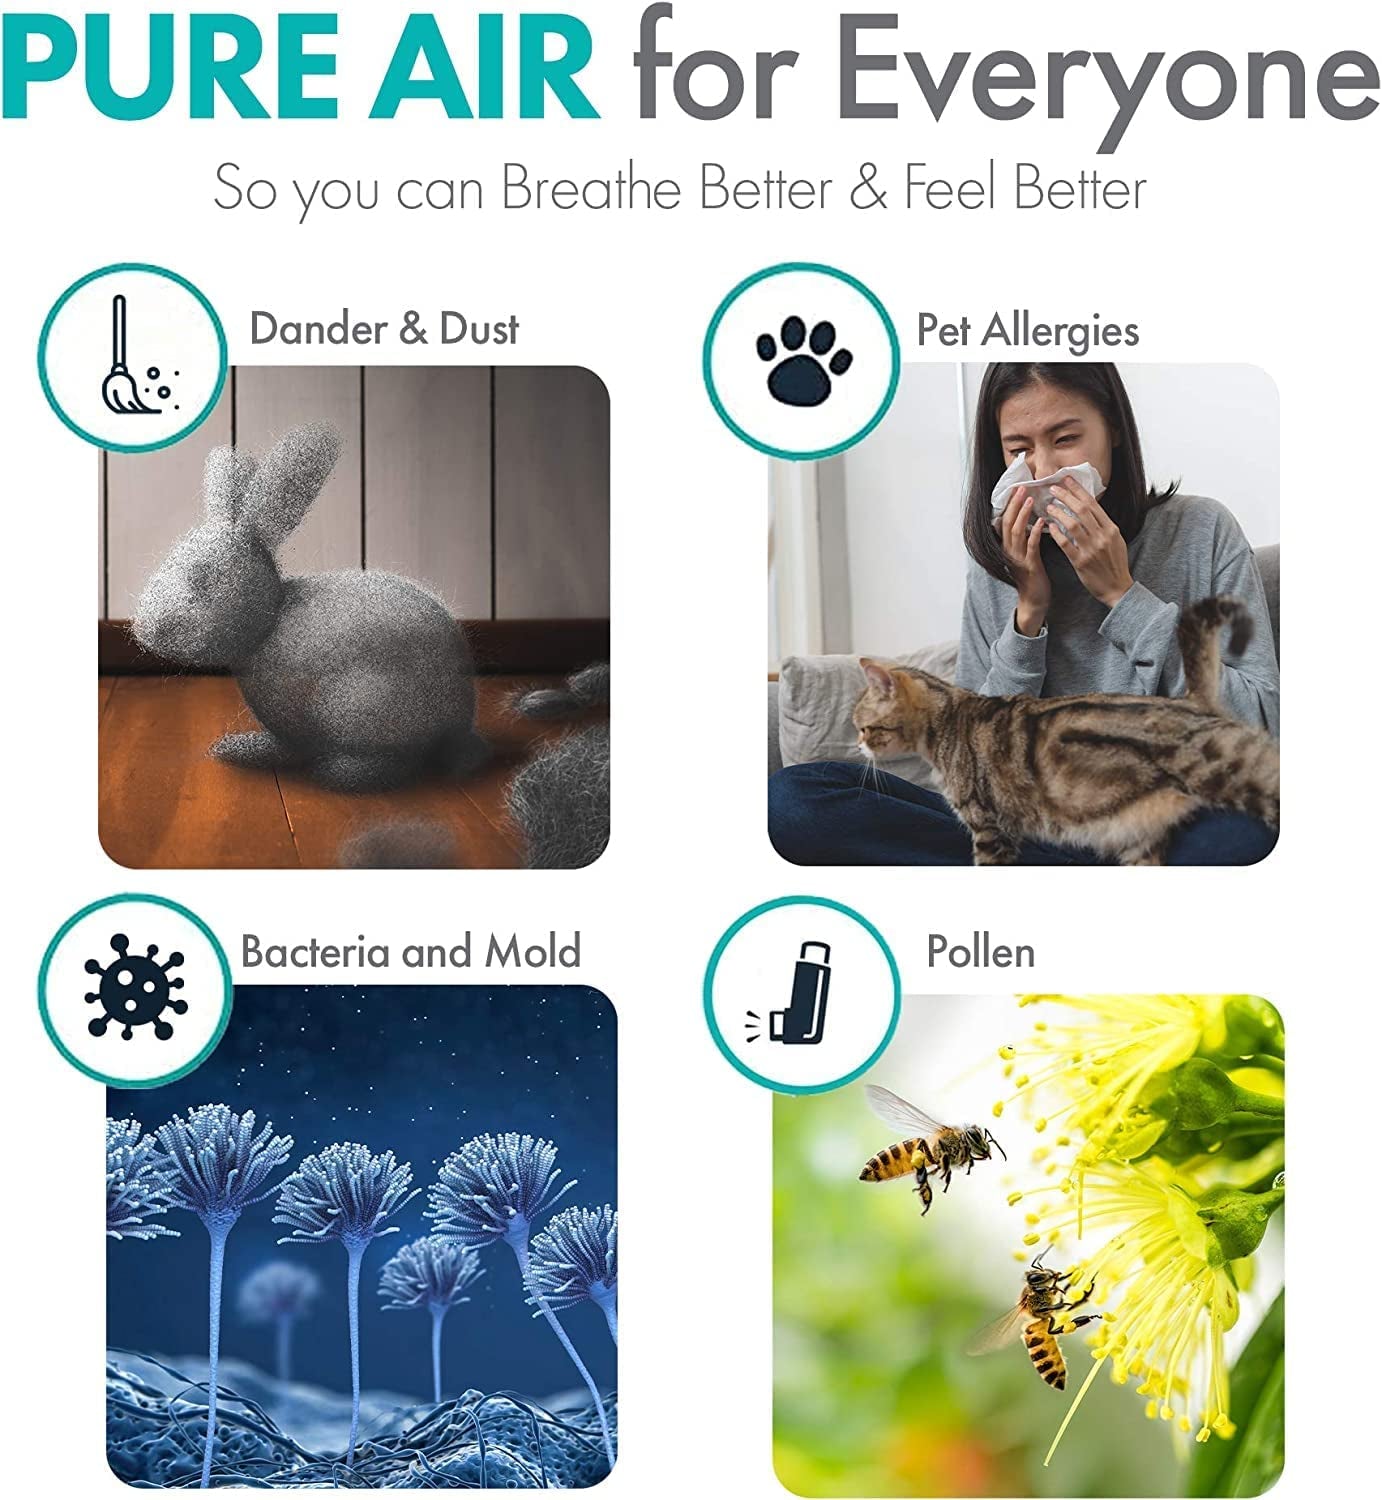 FLEX HEPA Air Purifier - Medical Grade Filtration H13 True HEPA - 700 Sqft Coverage - 99.9% Airborne Particle Removal,Captures Allergens, Dust, Mold, Germs, Smoke,Chemicals & Vocs - Smoke White